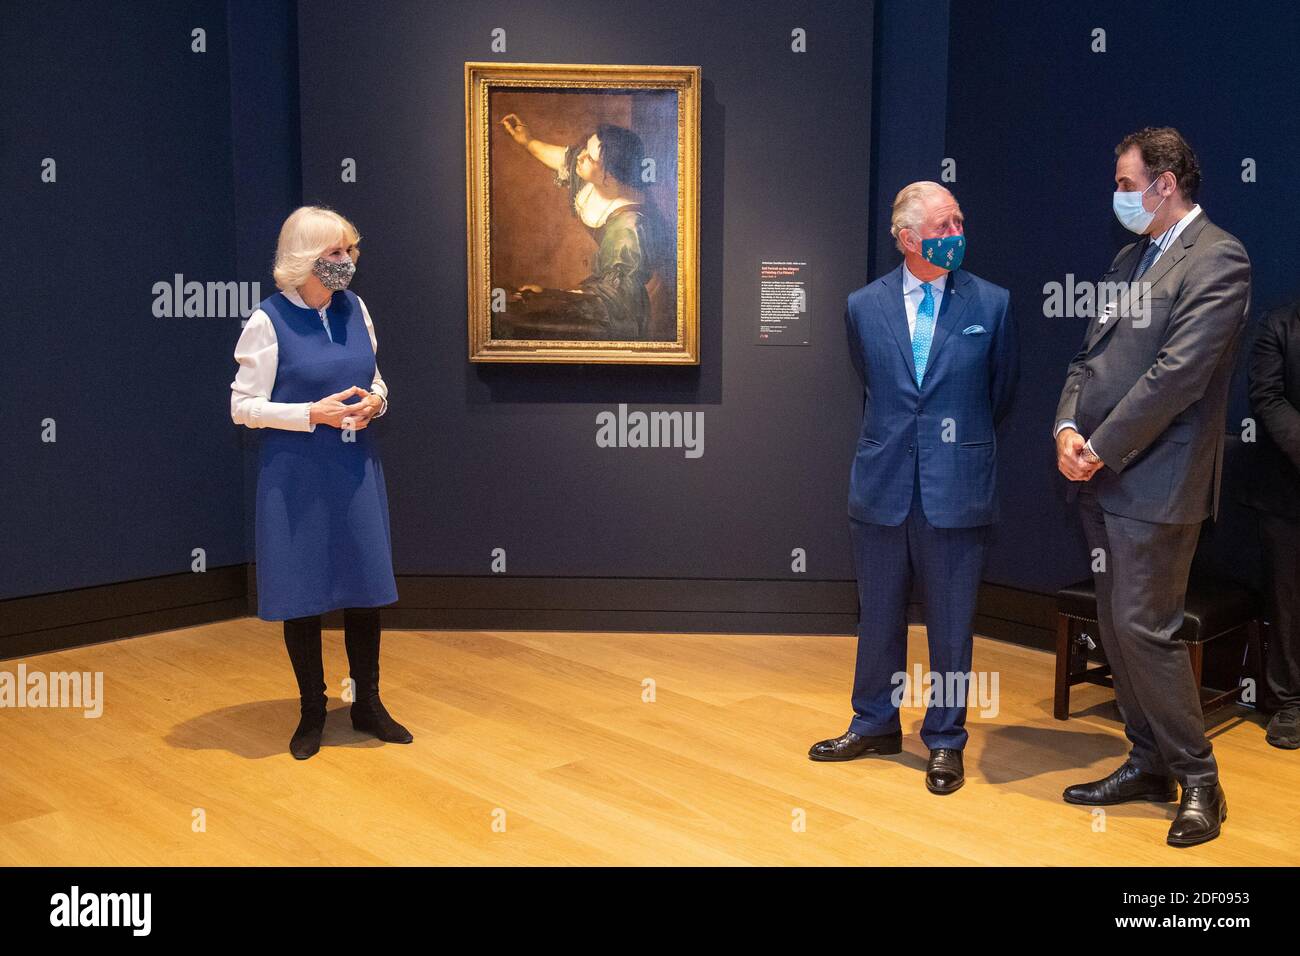 The Prince of Wales and Duchess of Cornwall and National Gallery Director Dr Gabriele Finaldi view 'Self Portrait as the Allegory of Painting (La Pittura)' by Artemisia Gentileschi during a visit to view the 'Artemisia' and the 'Titian: Love Desire Death' exhibitions at the National Gallery in London, on its first day of reopening following the second national coronavirus lockdown. Stock Photo